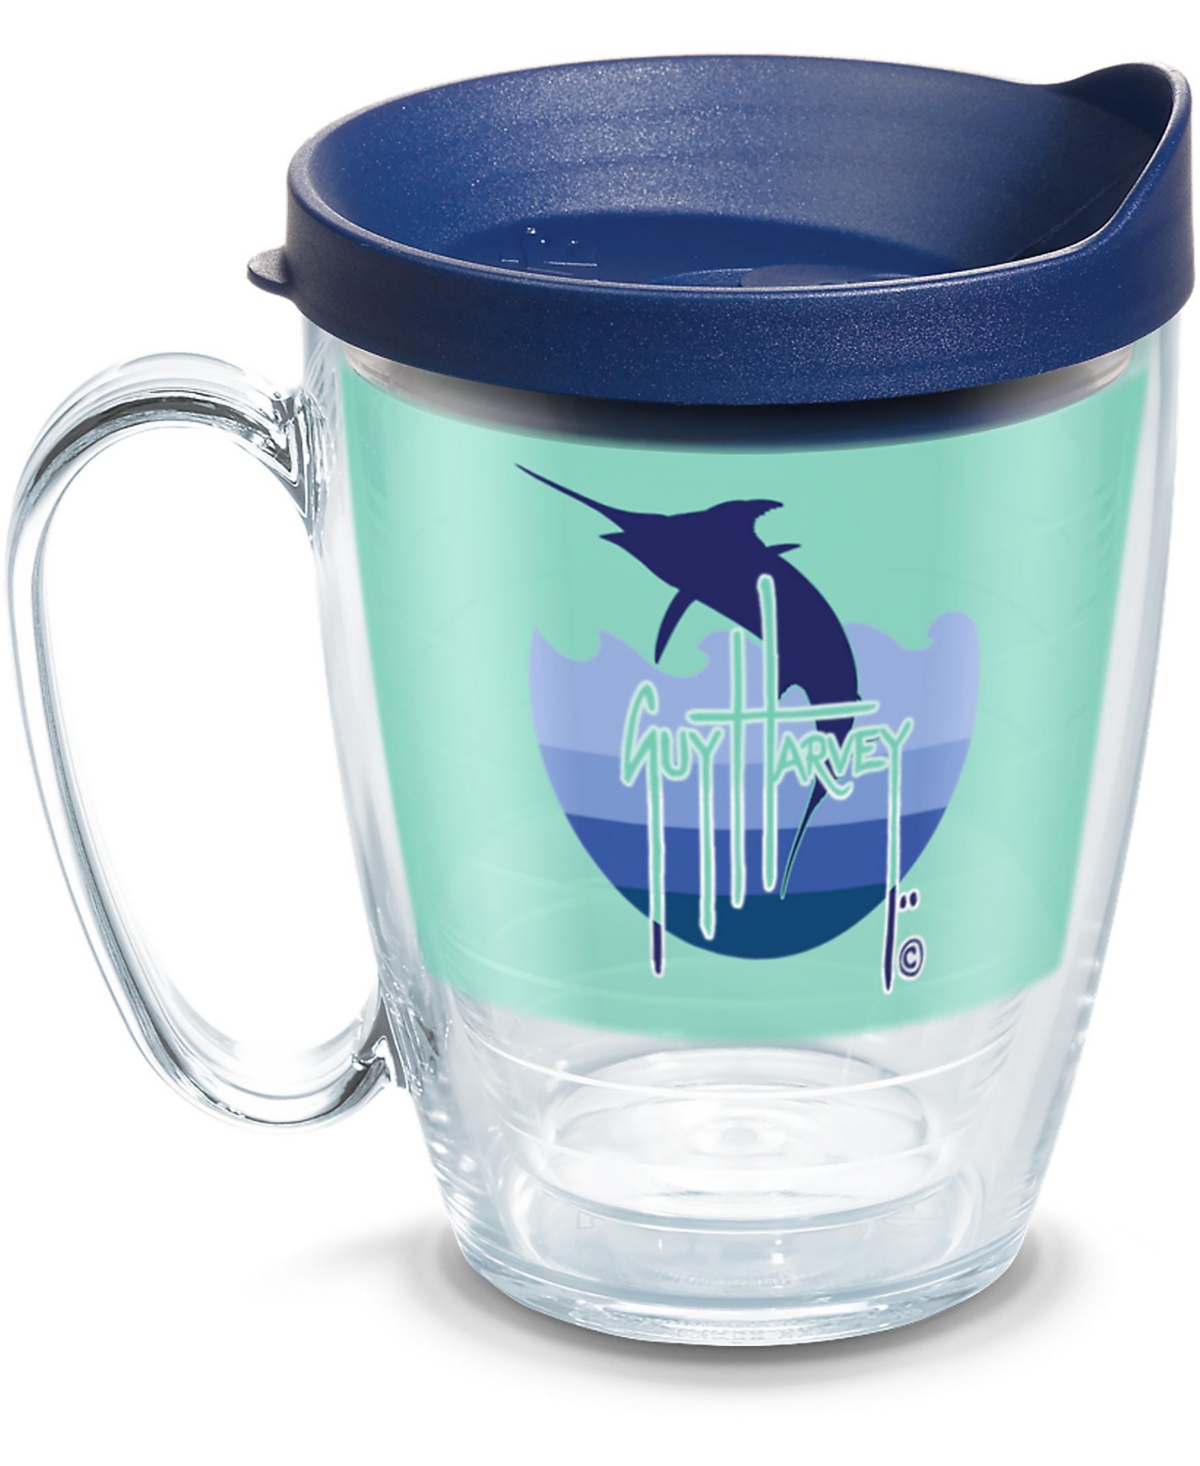 Tervis Tumbler Tervis Guy Harvey Mint And Navy Marlin Made In Usa Double Walled Insulated Tumbler Travel Cup Keeps  In Open Miscellaneous